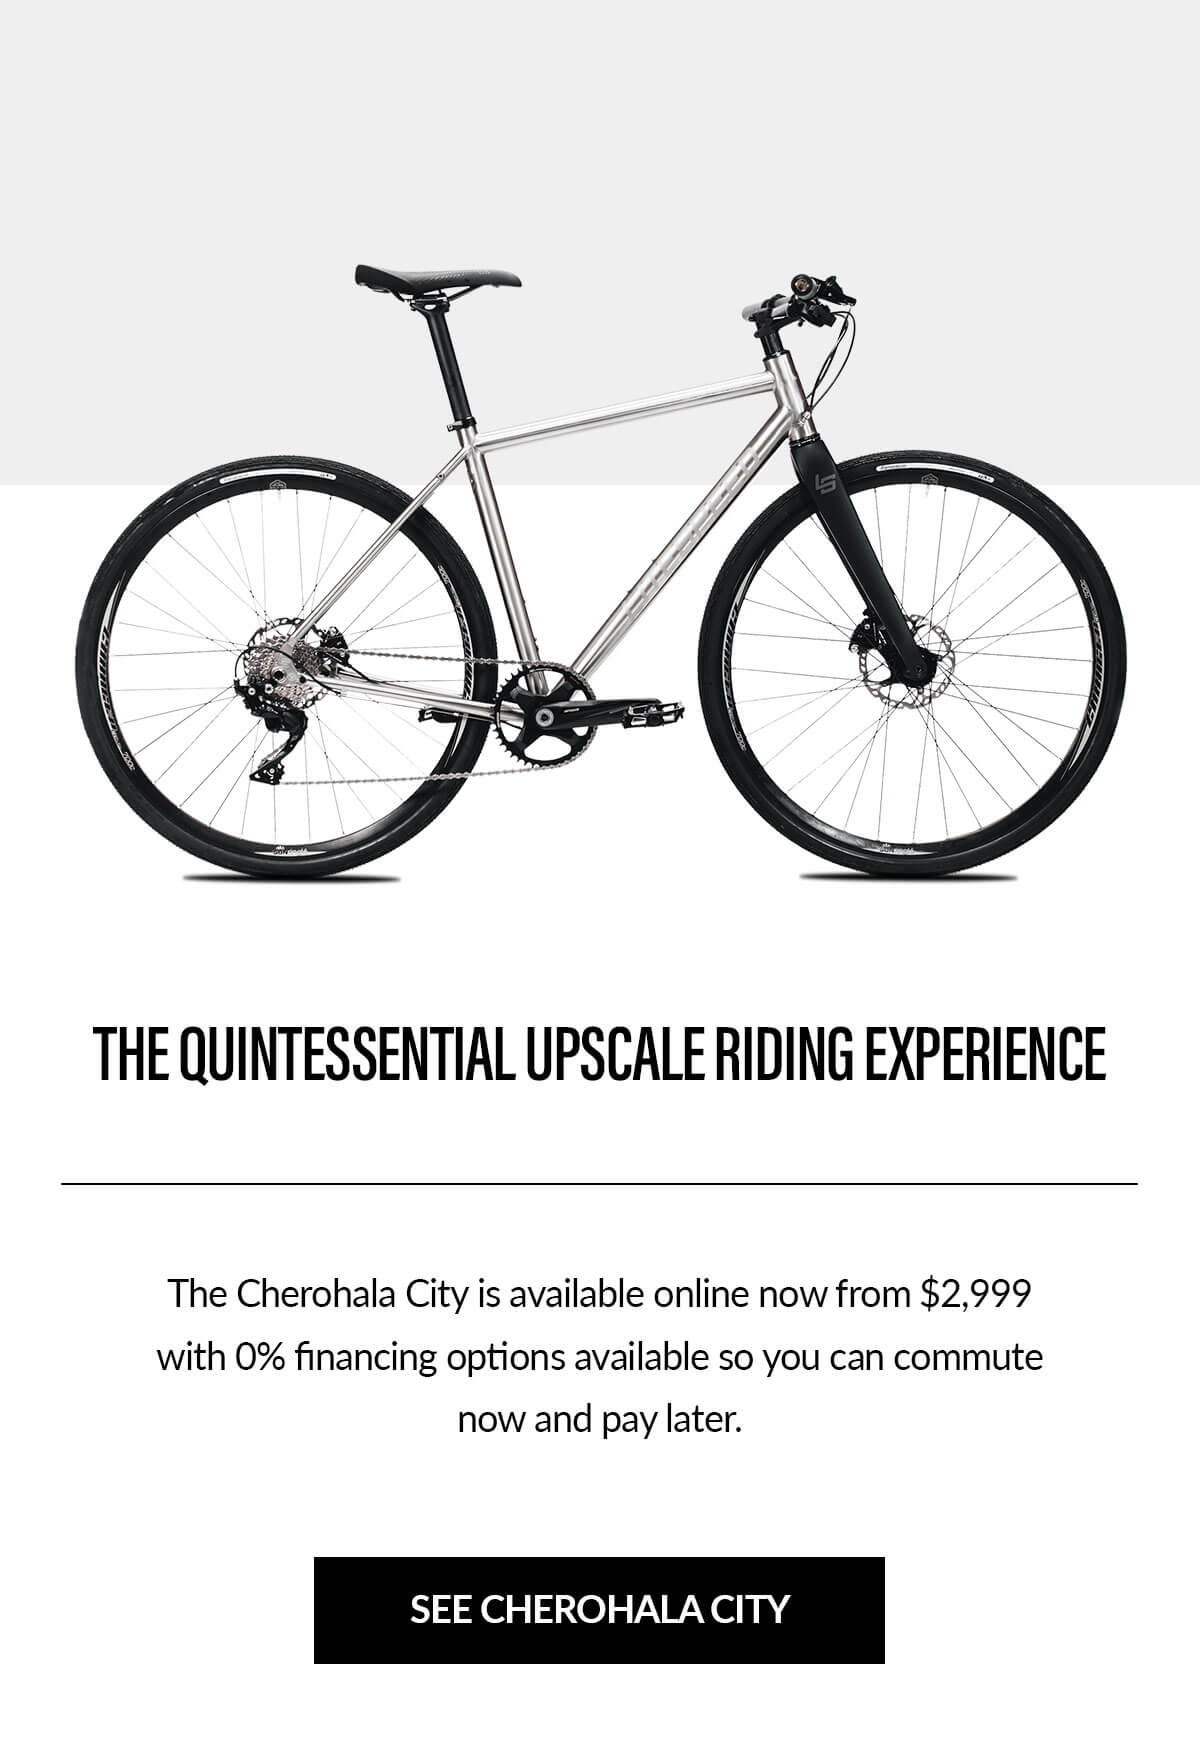 The Quintessential Upscale Riding Experience - shop the Cherohala City, available online now.